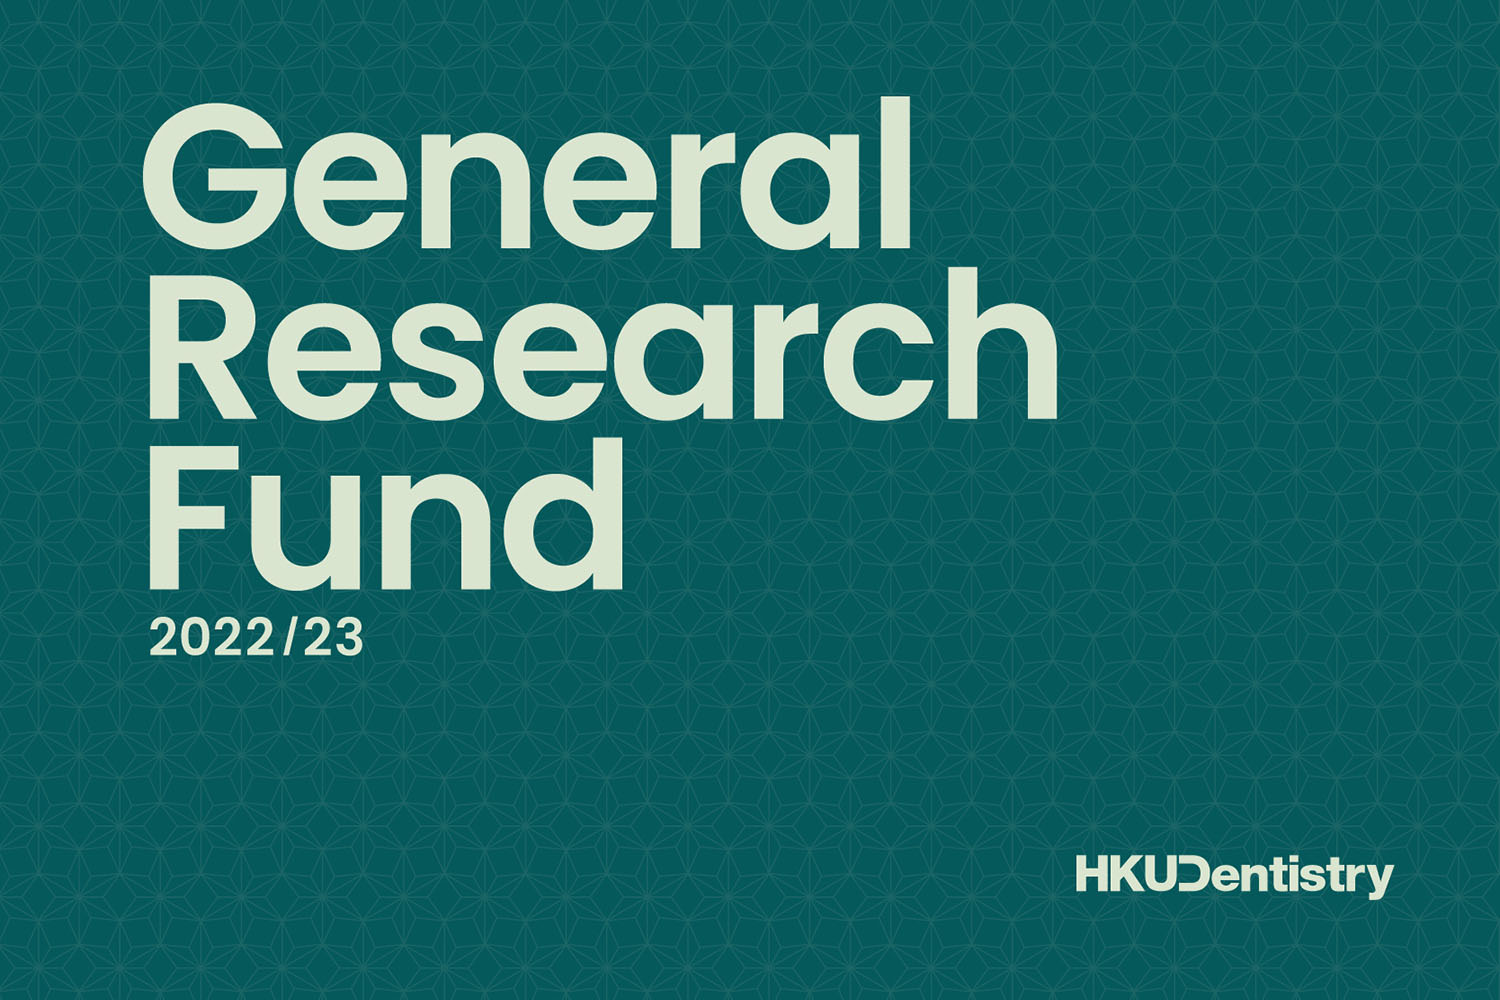 General Research Fund